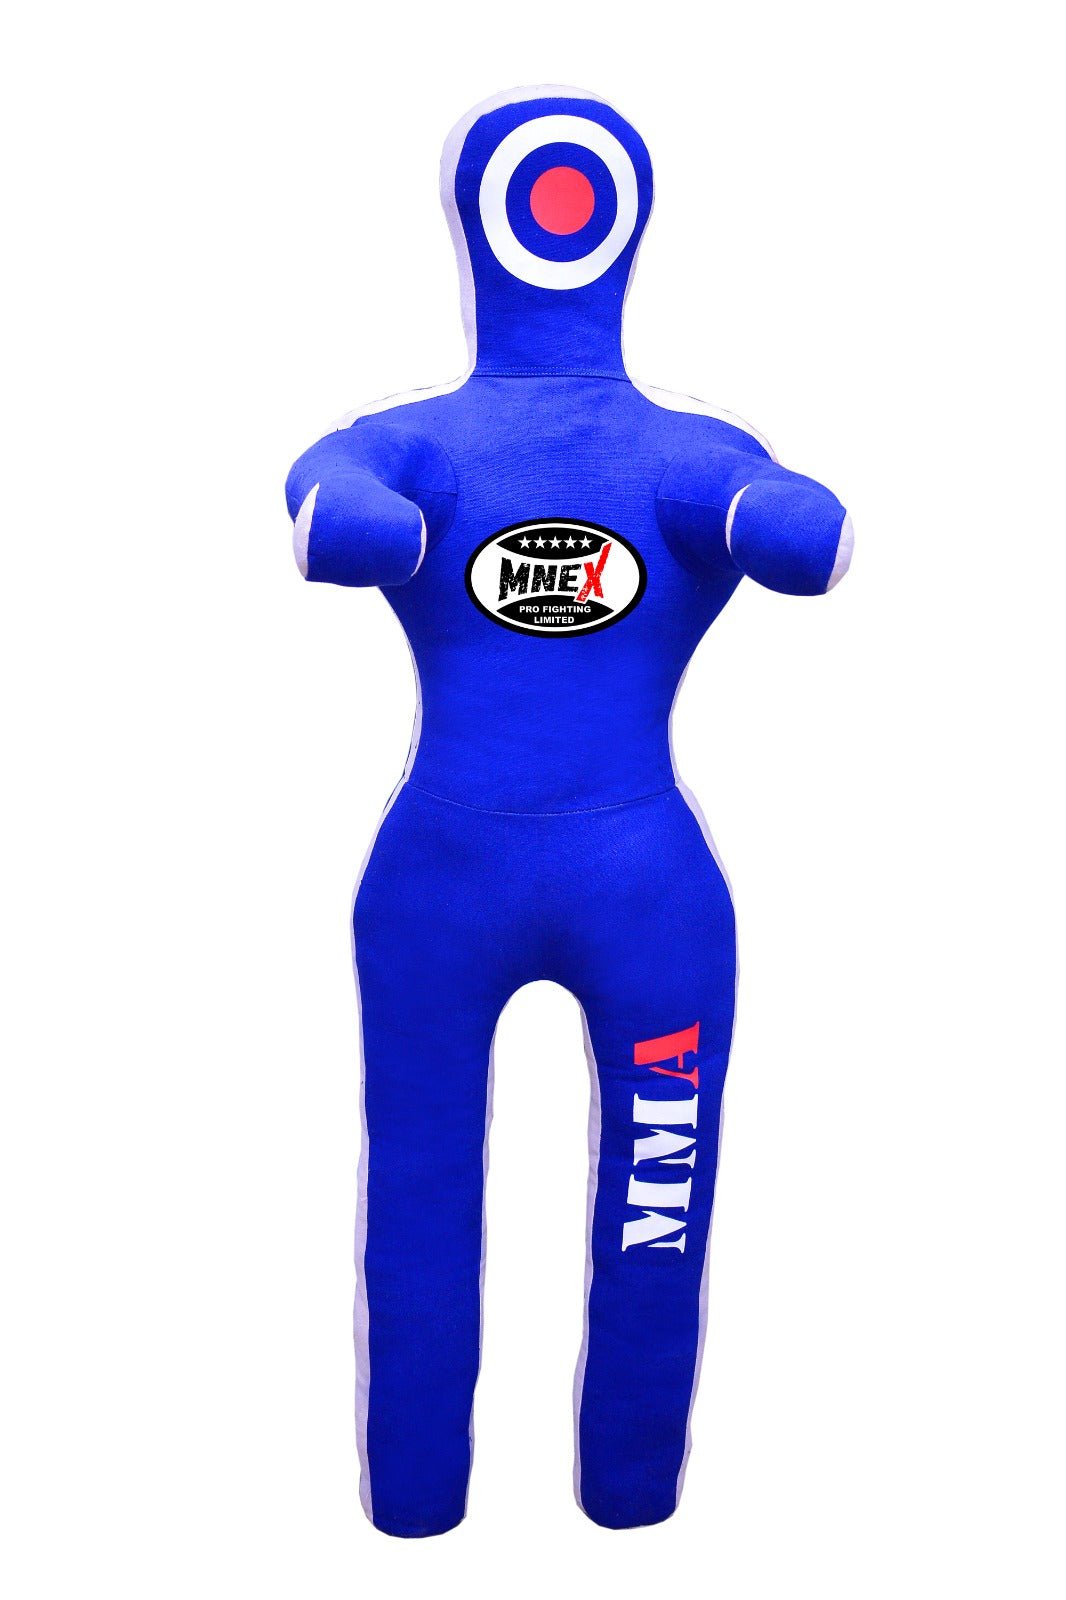 Our Sports Wears - MNEX PRO FIGHTING LIMITED